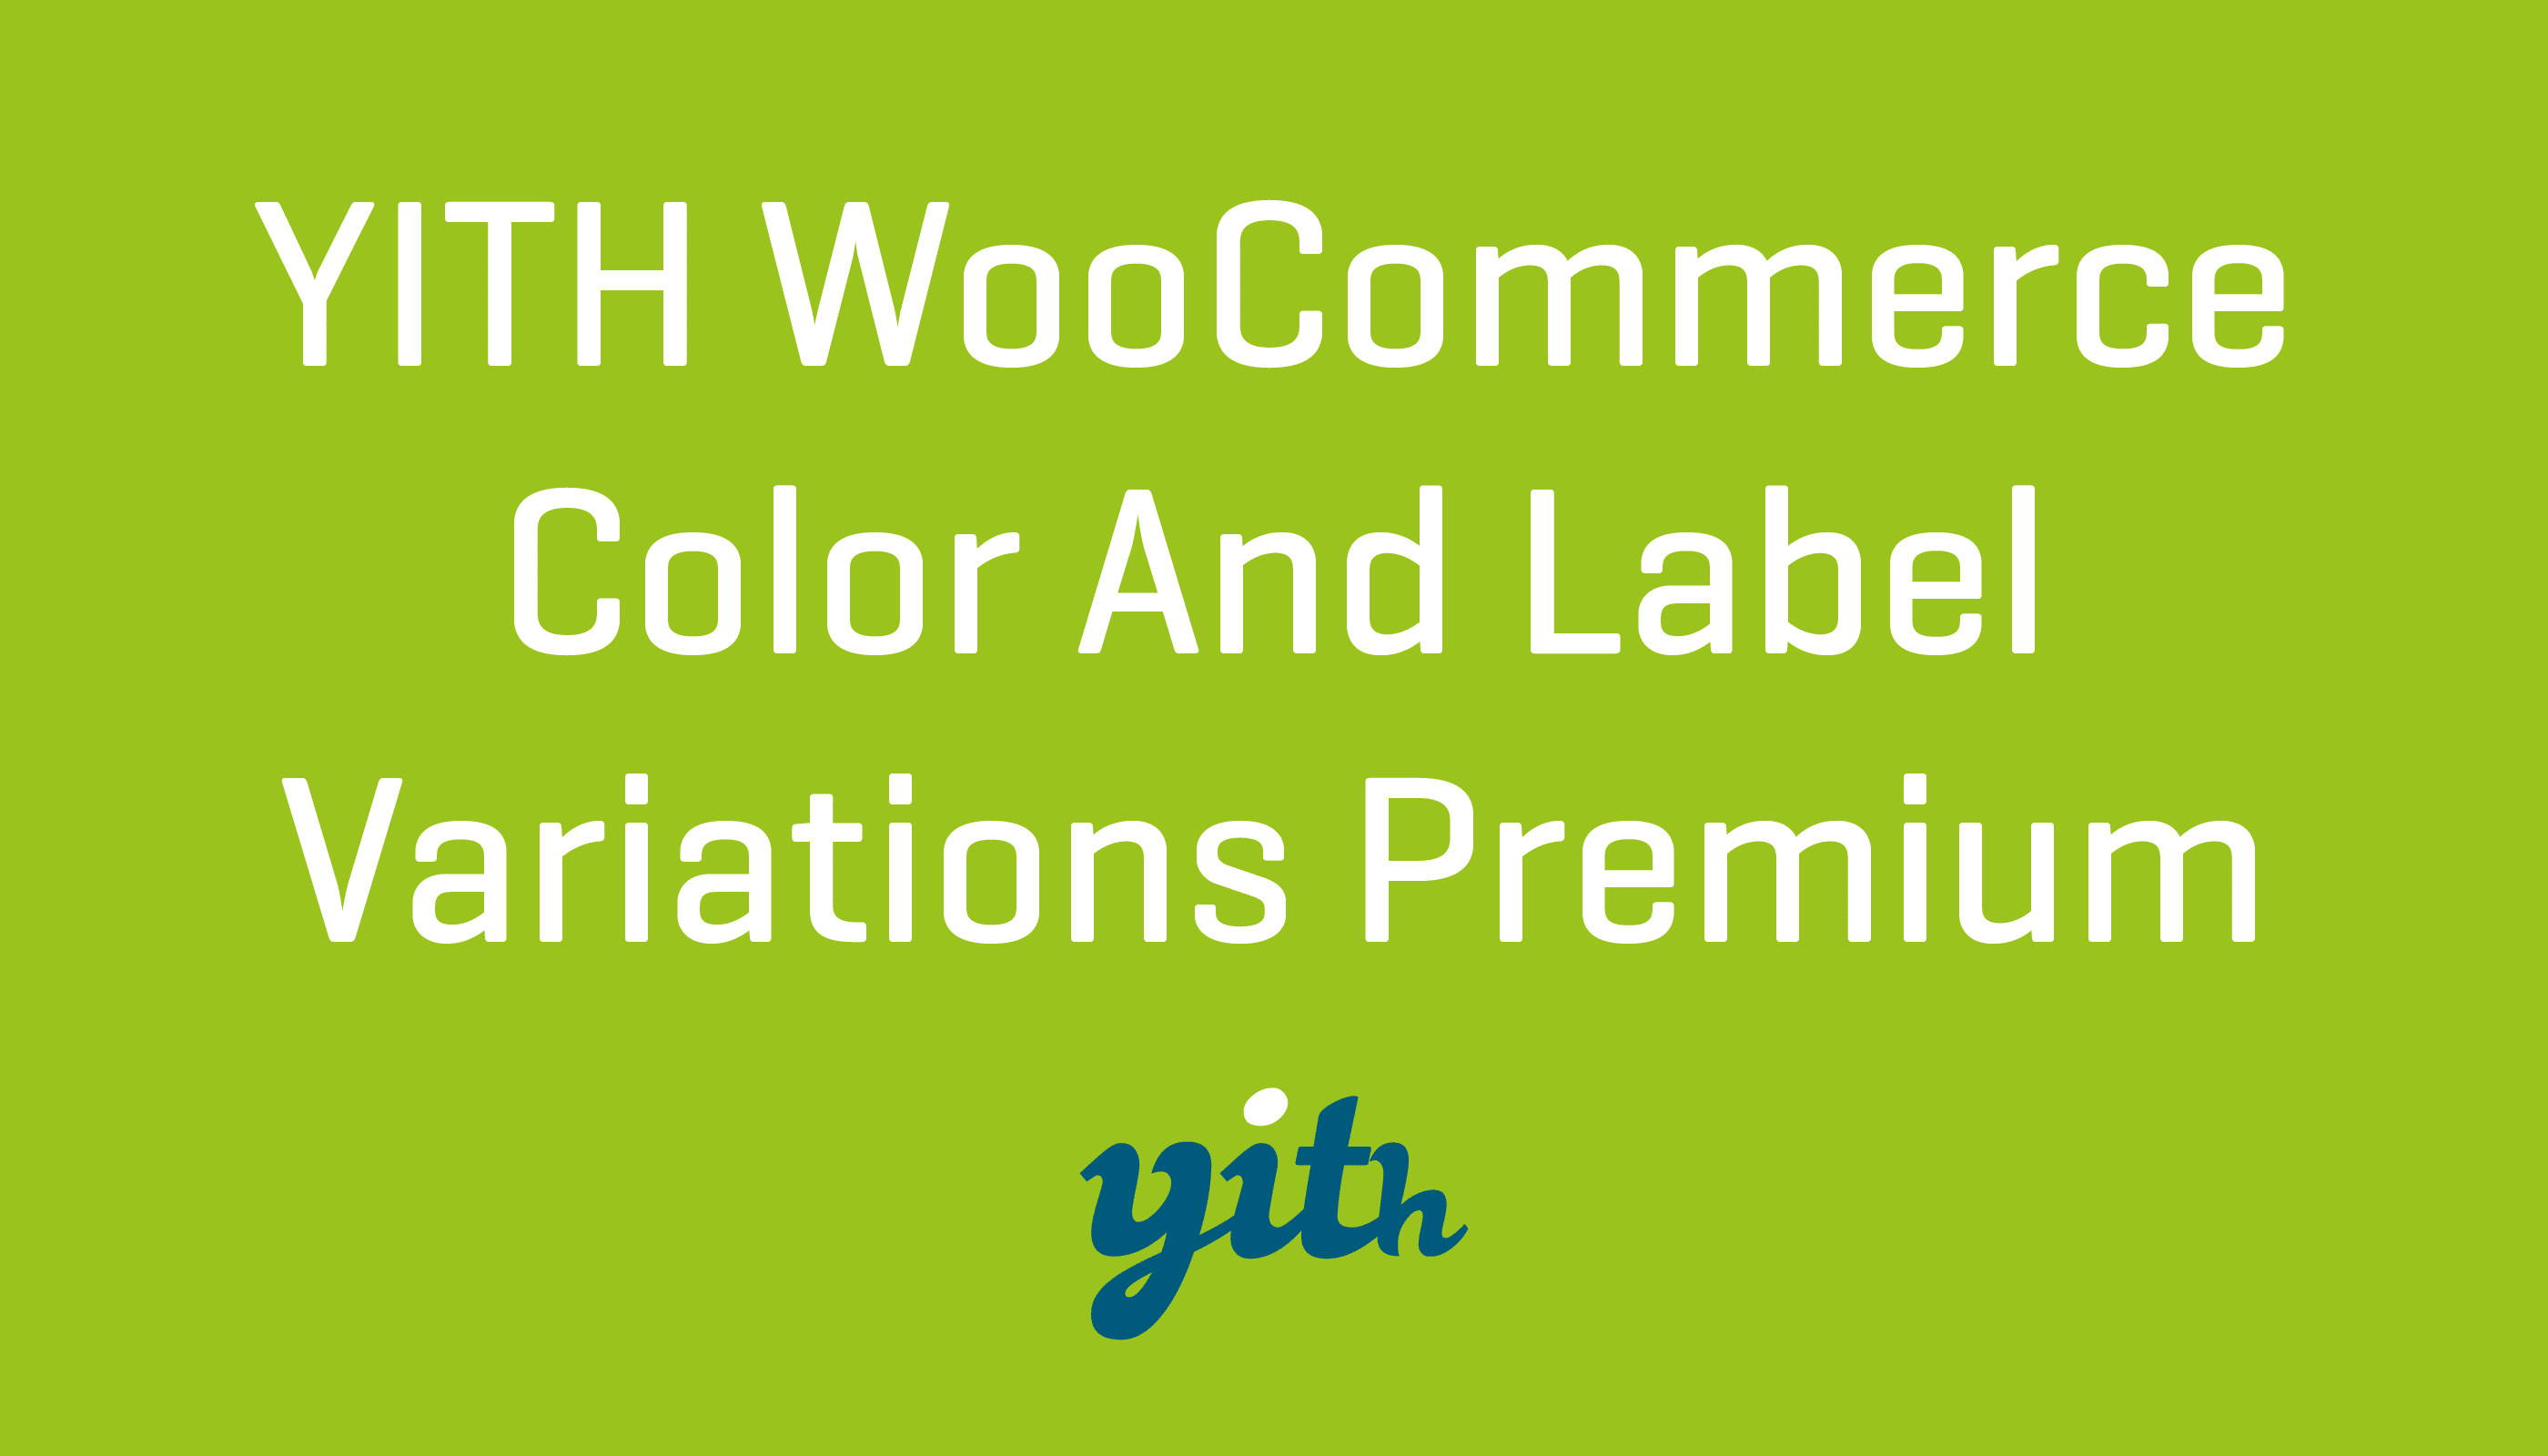 YITH WooCommerce Color And Label Variations Premium